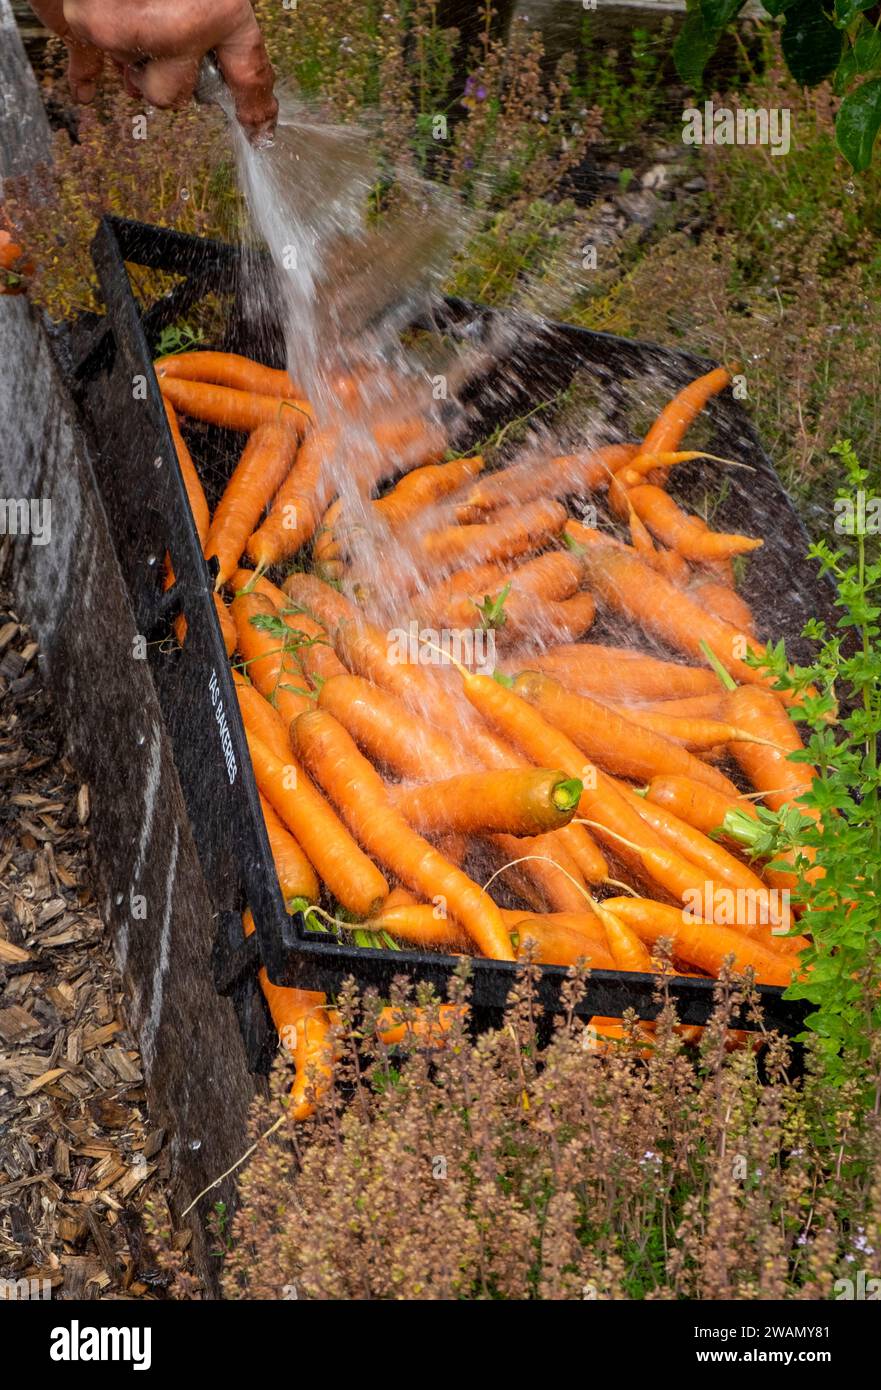 Washing fresh picked carrots using a hose and a plastic bakers tray. Stock Photo